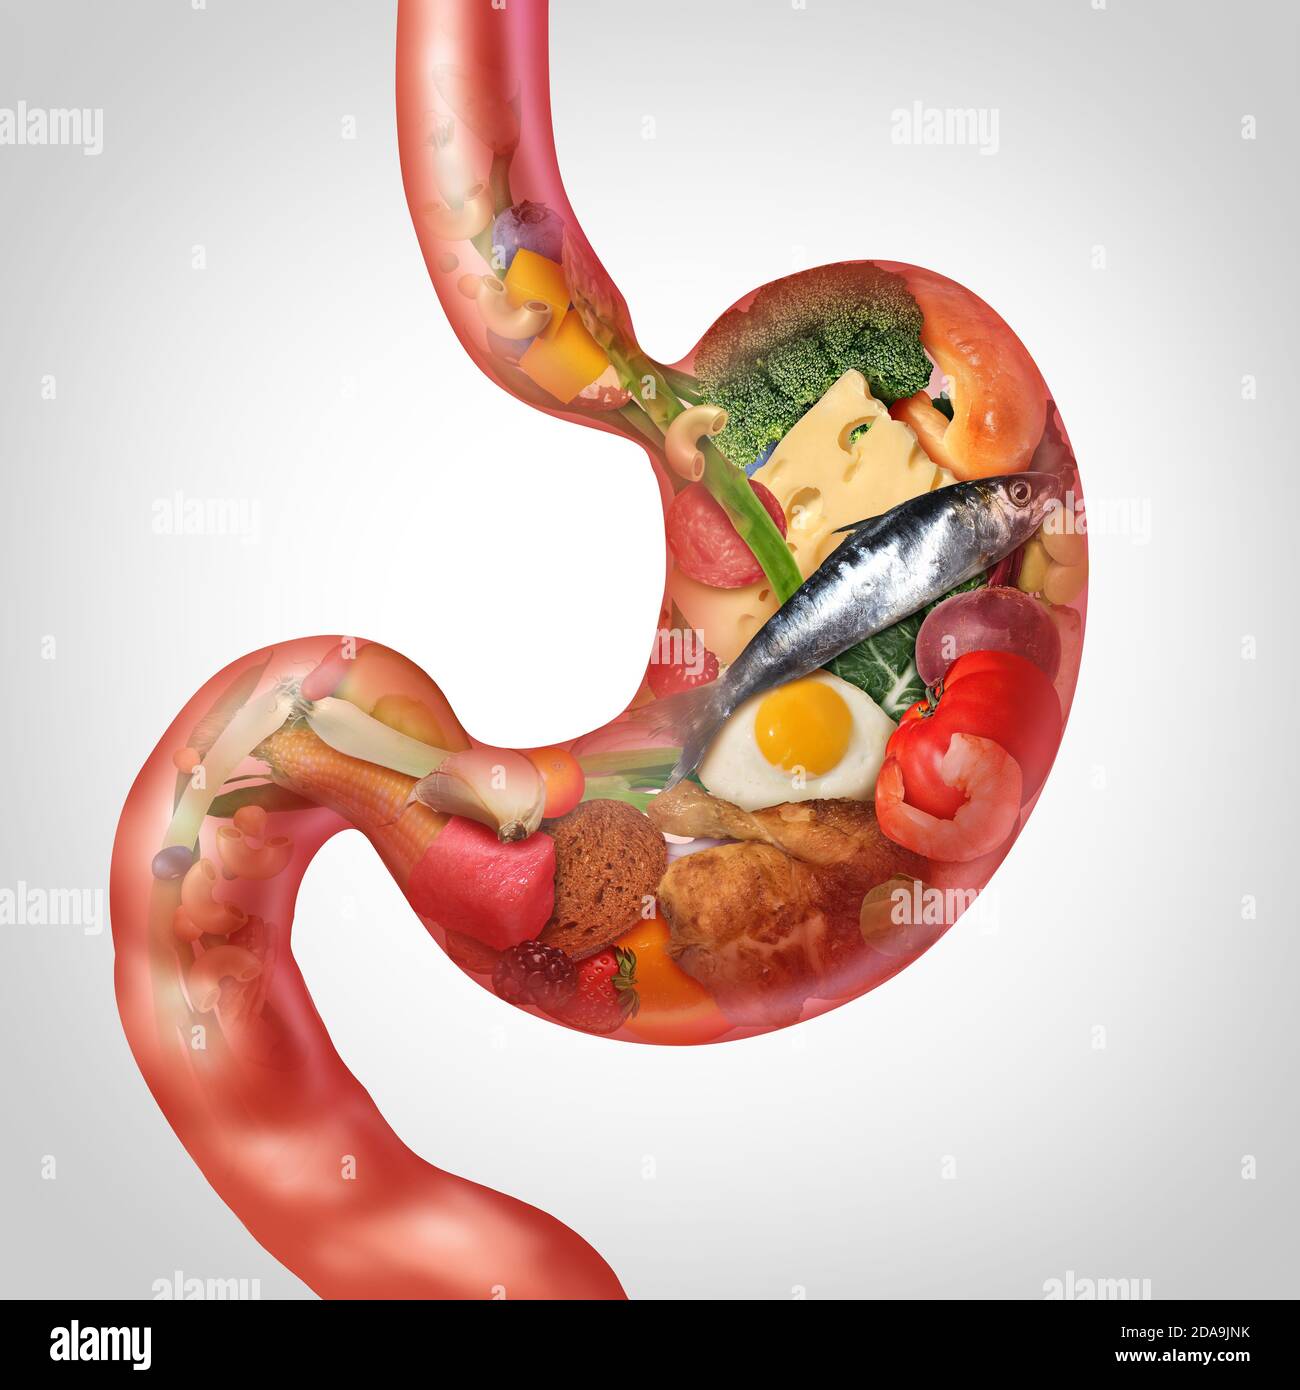 Food digestion and  digesting nutrition as ingredients shaped as a stomach representing gastrointestinal health or digestive problems. Stock Photo